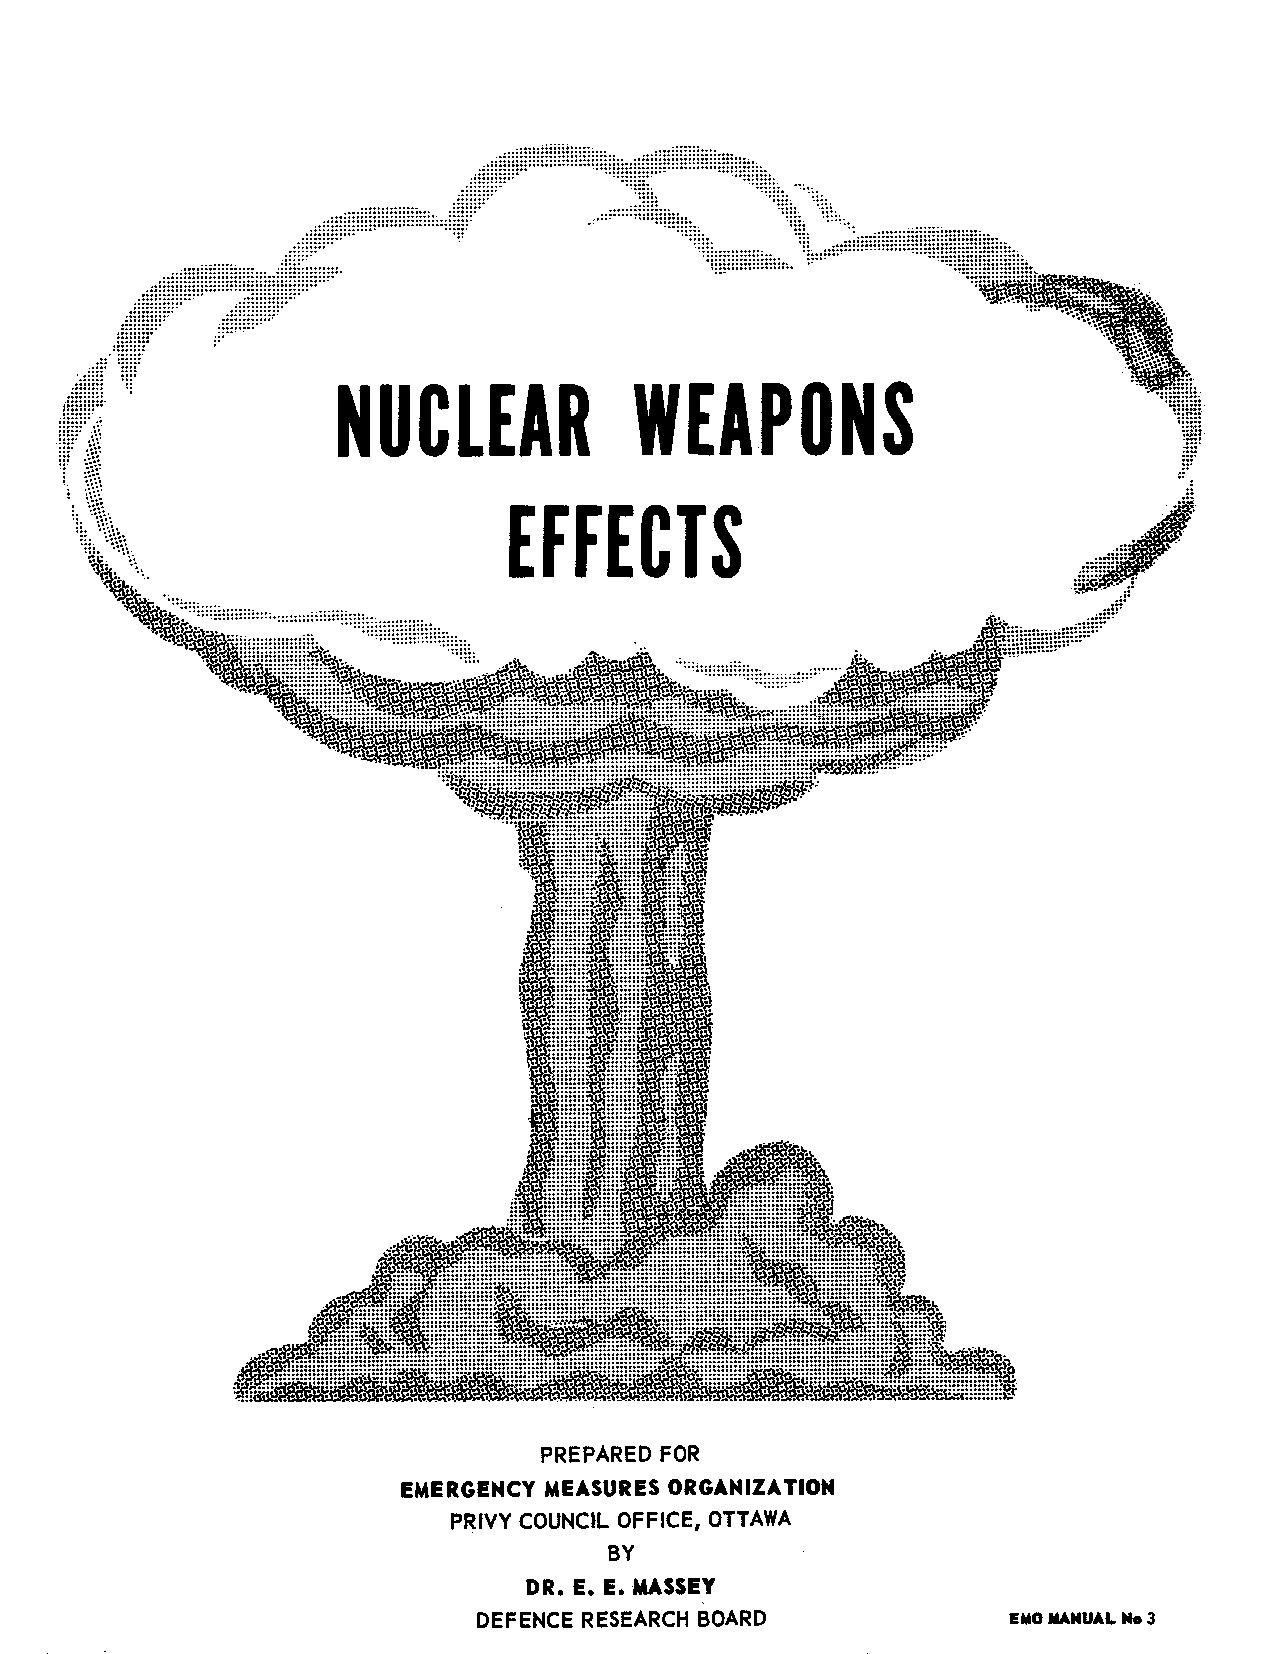 Nuclear Weapons Effects - Canada Emergency Measures Organization